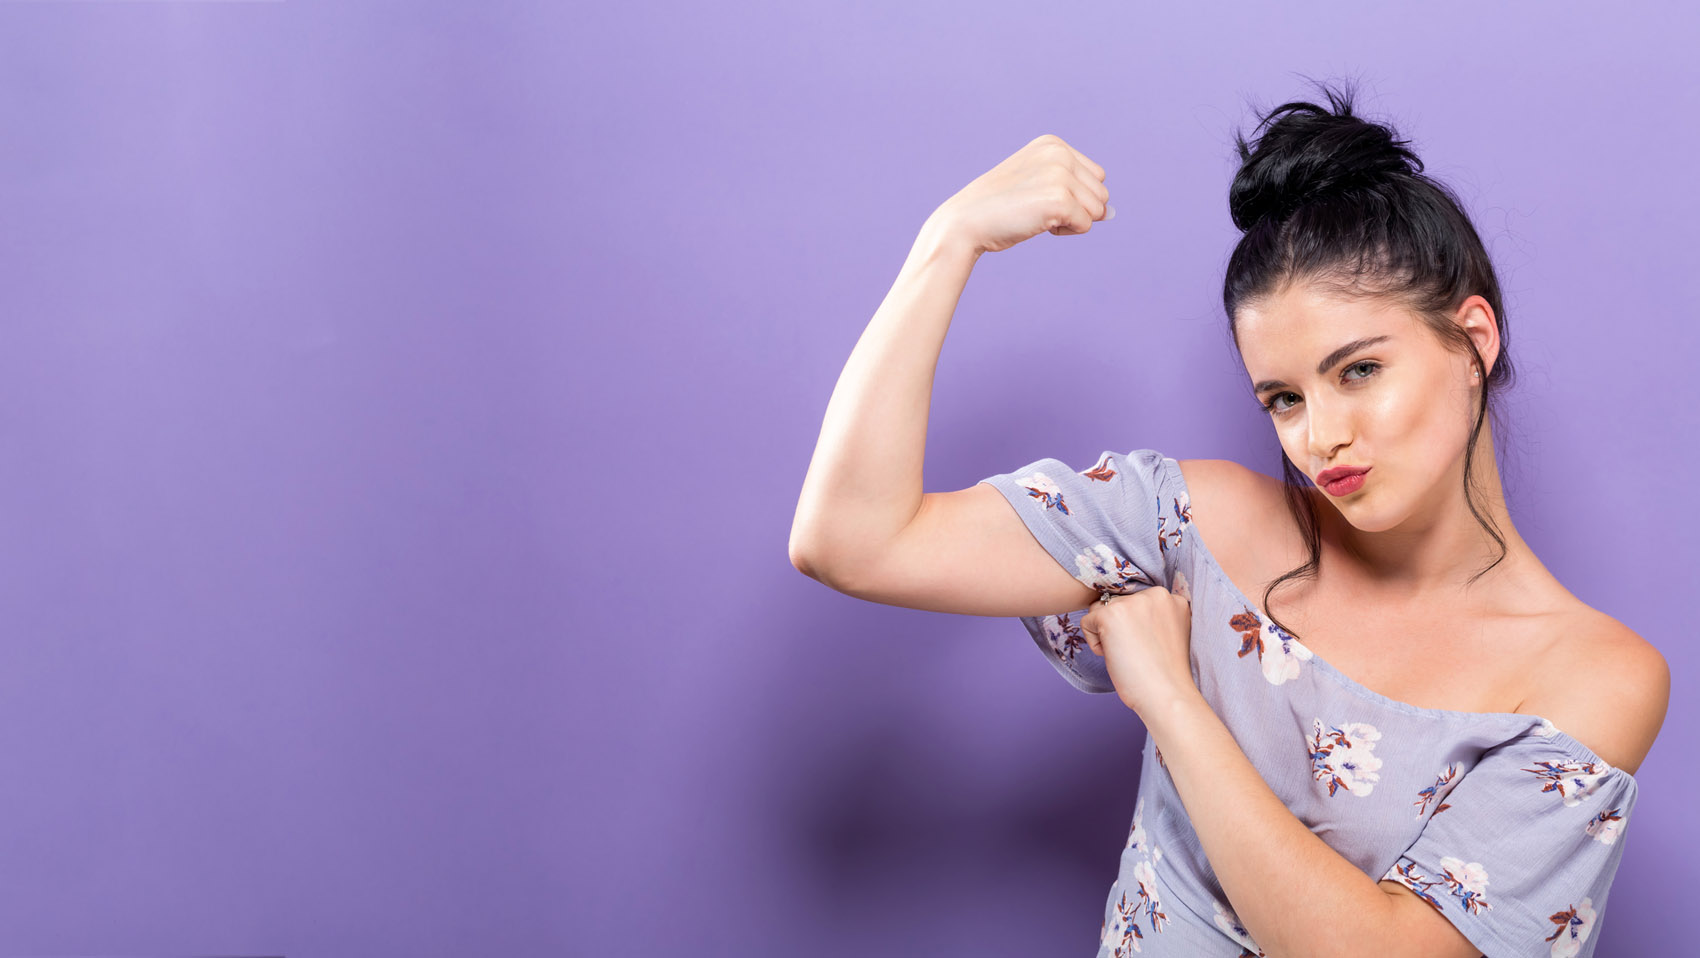 woman shows arm muscle, confidence, self confidence